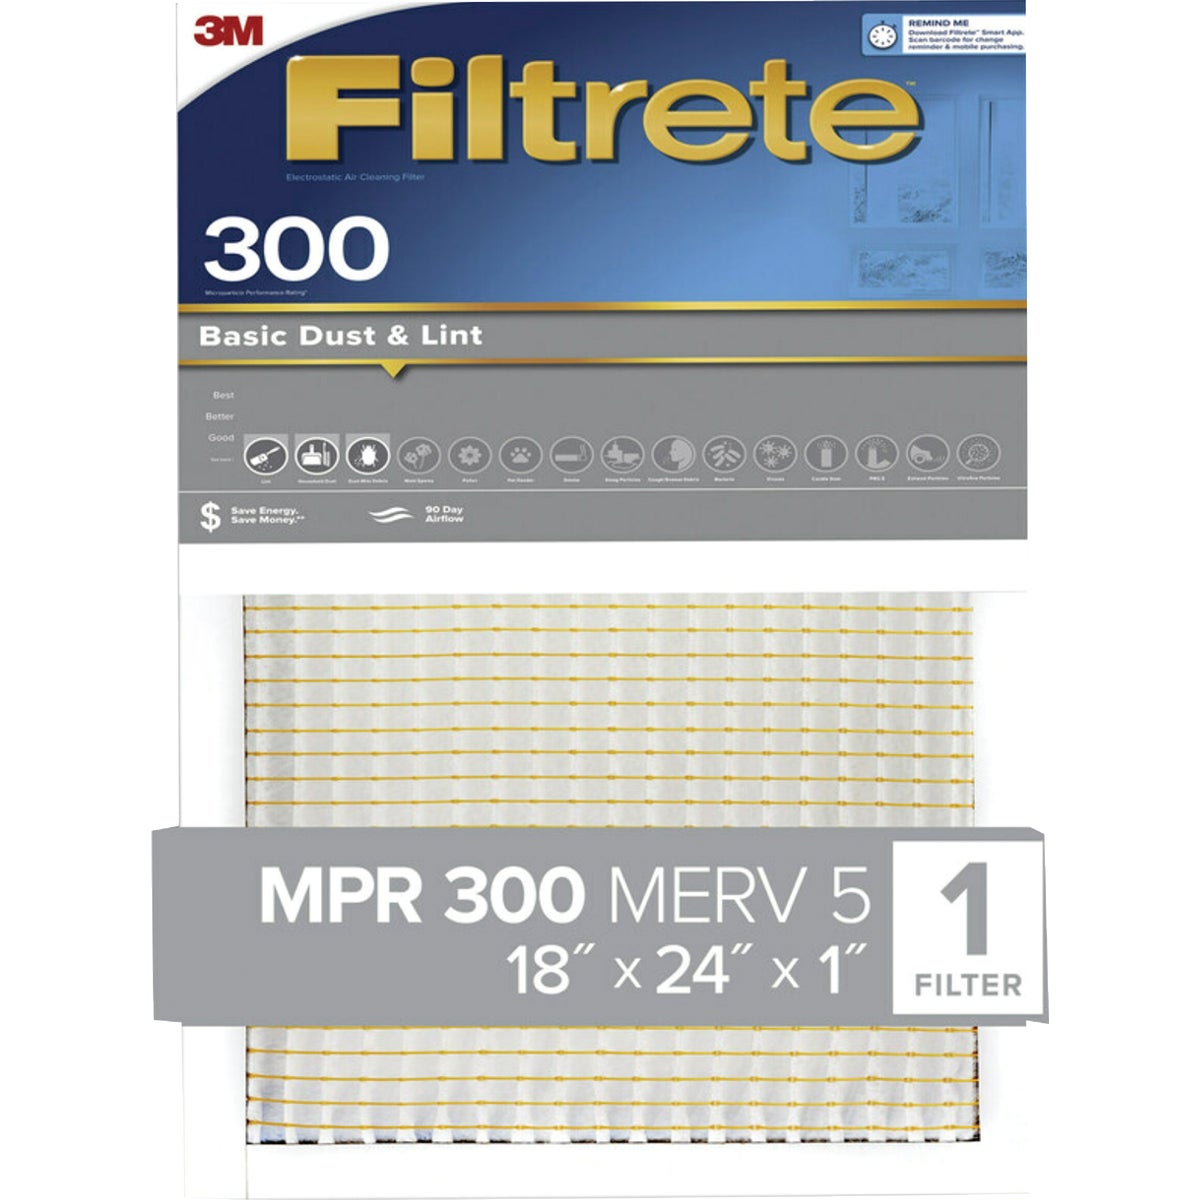 3M 321-4 3M Filtrete 18 In. x 24 In. x 1 In. Basic Dust & Lint 300 MPR Furnace Filter 321-4 Pack of 4